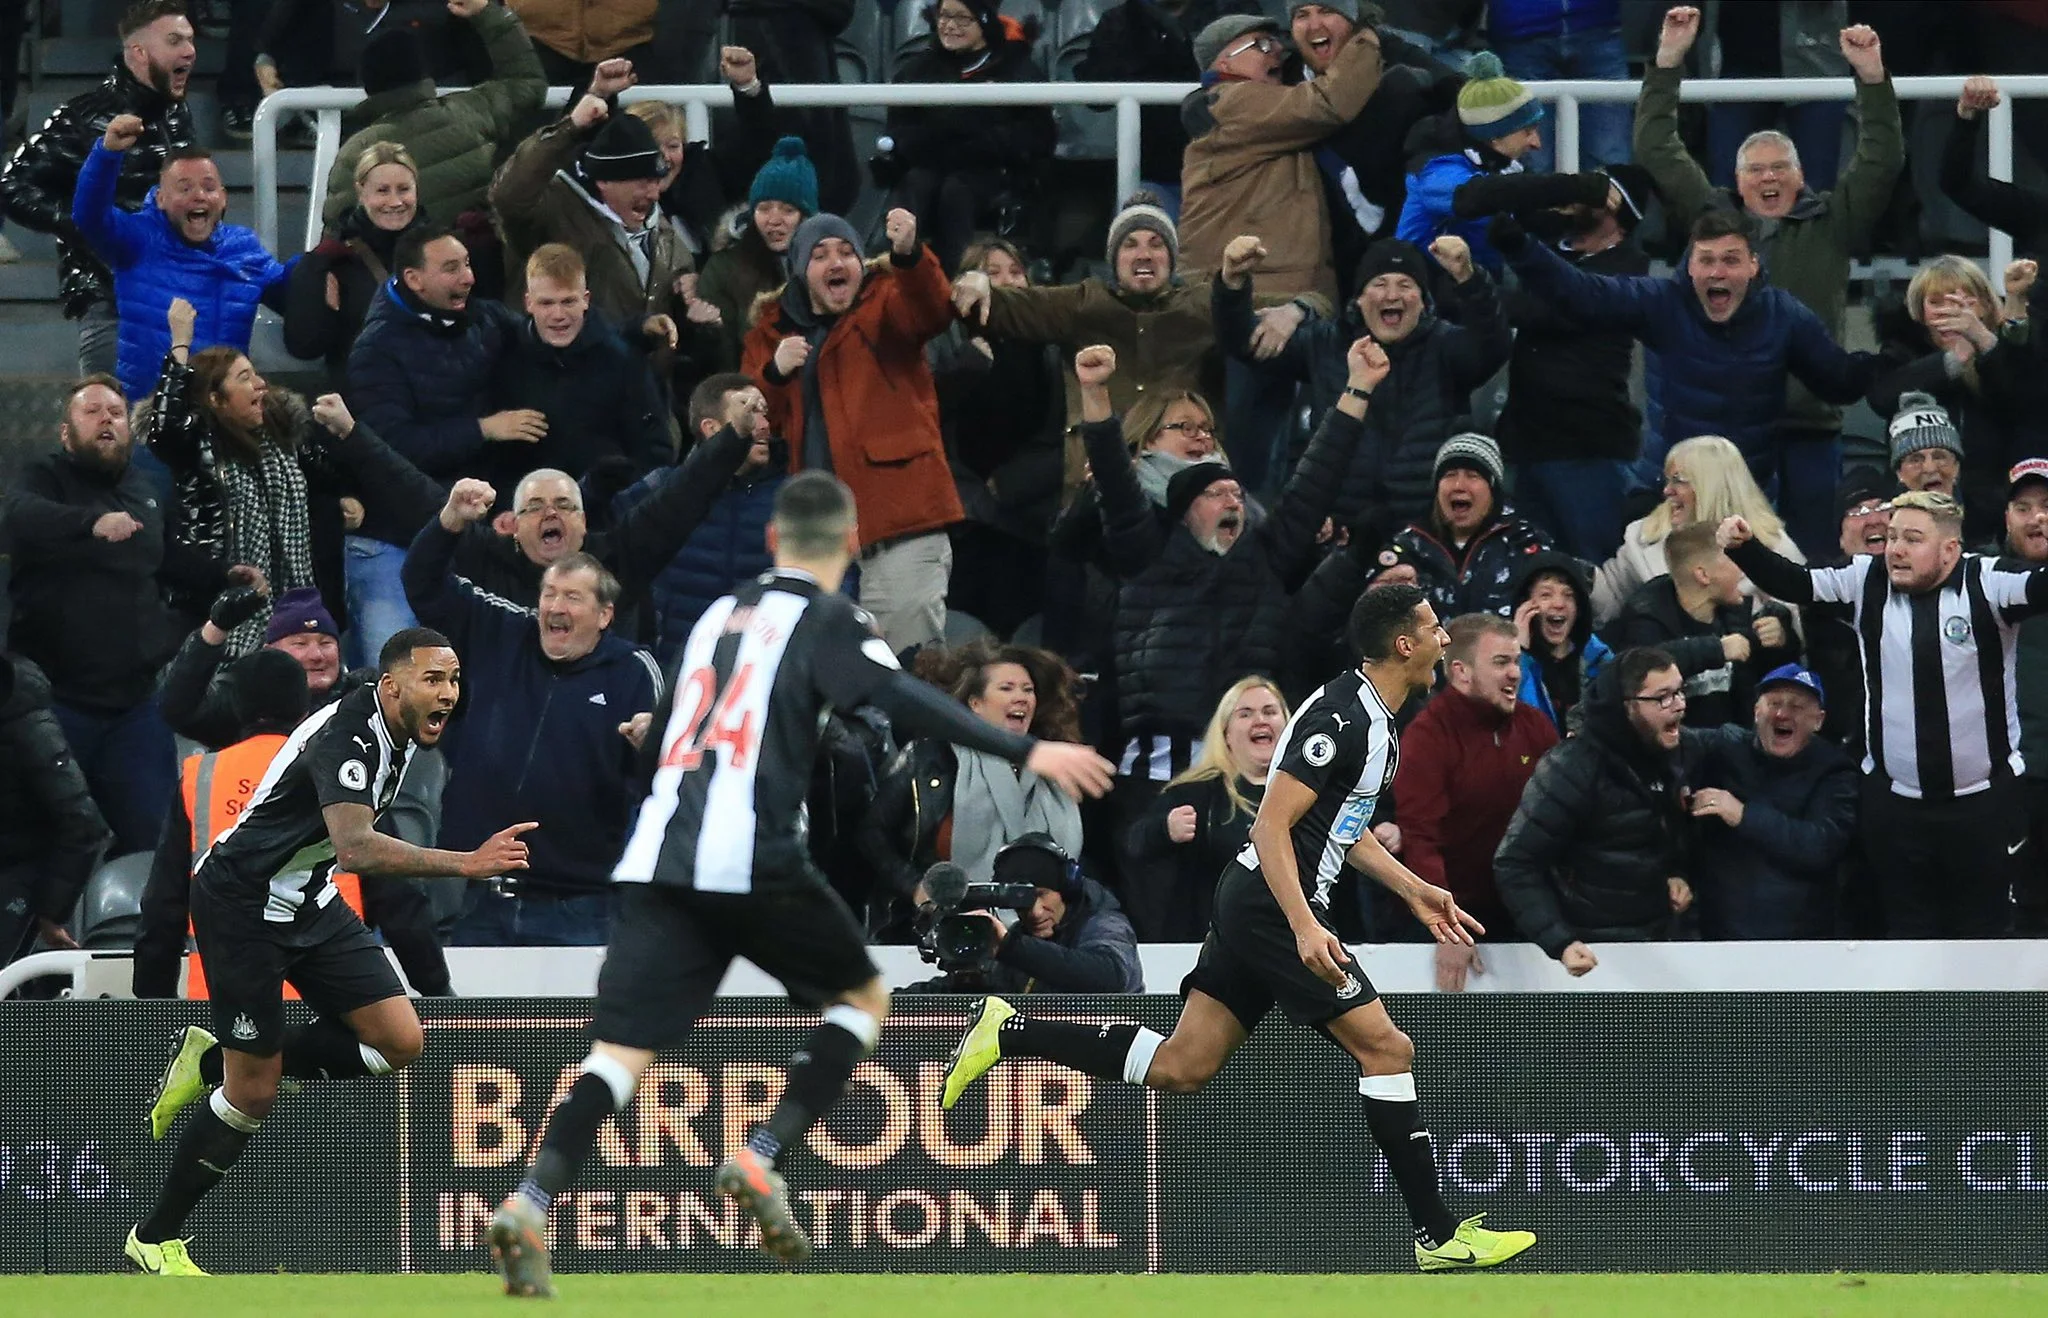 Isaac Hayden of Newcastle United celebrates after scoring a late winner against Chelsea on January 18, 2020 in Newcastle, England